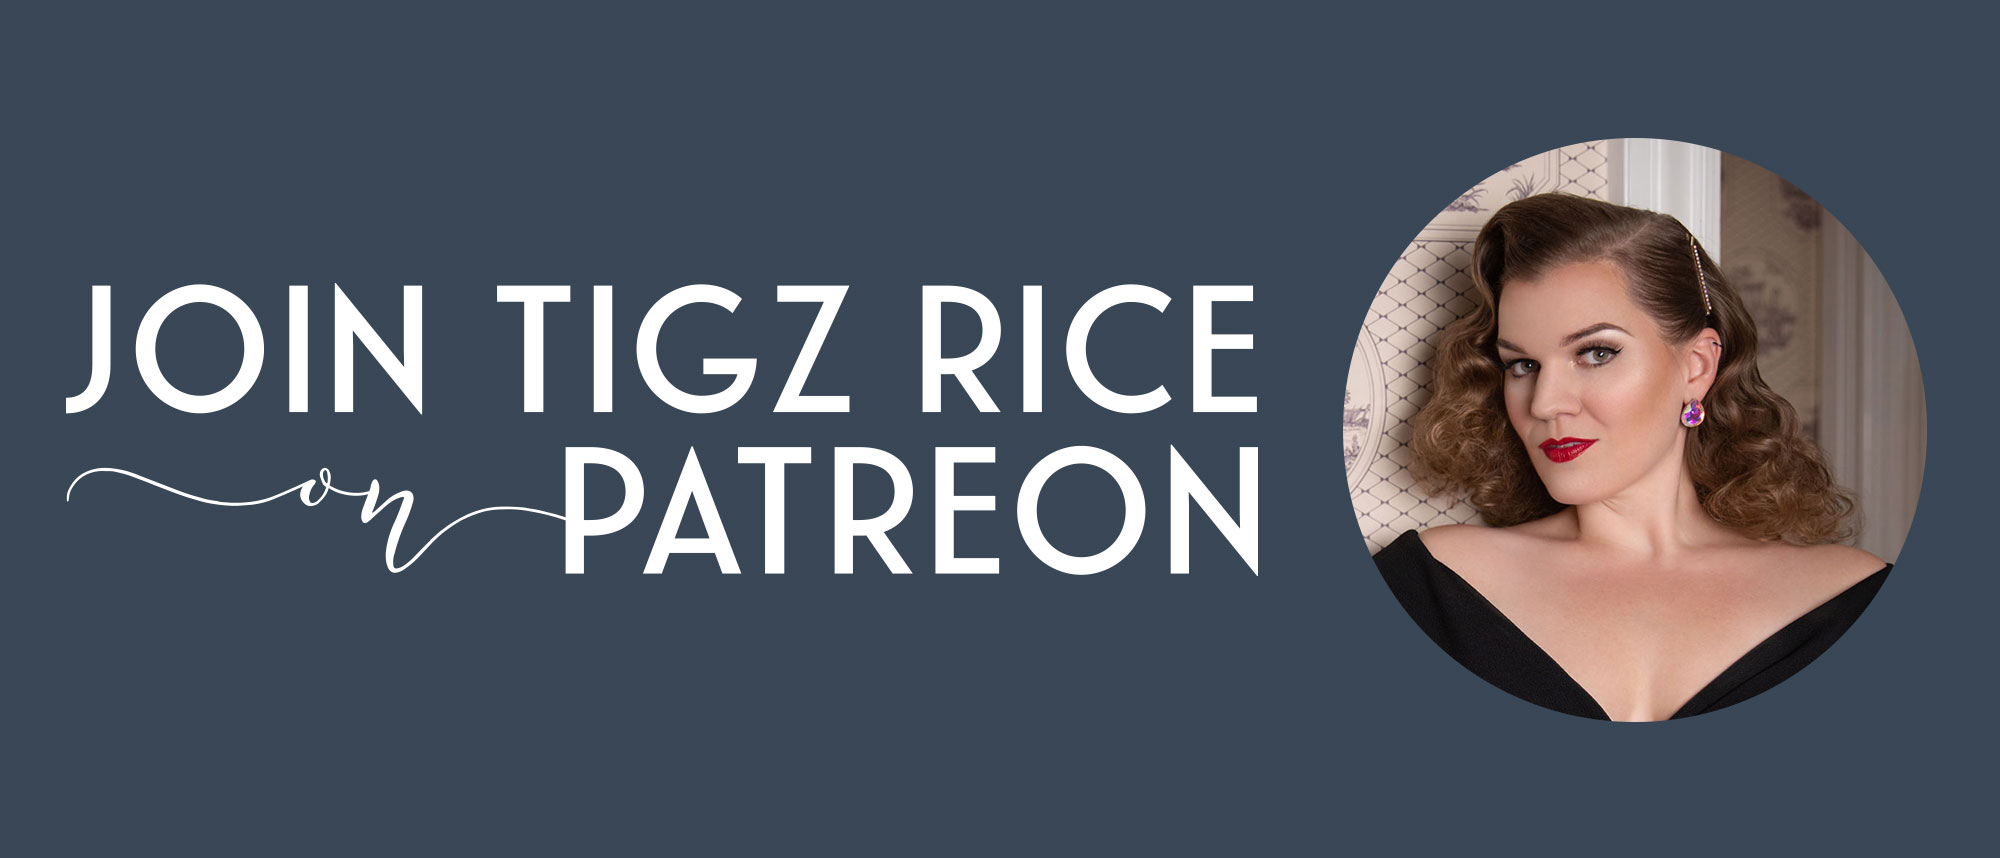 Join Tigz Rice On Patreon for Behind The Scenes Boudoir Content